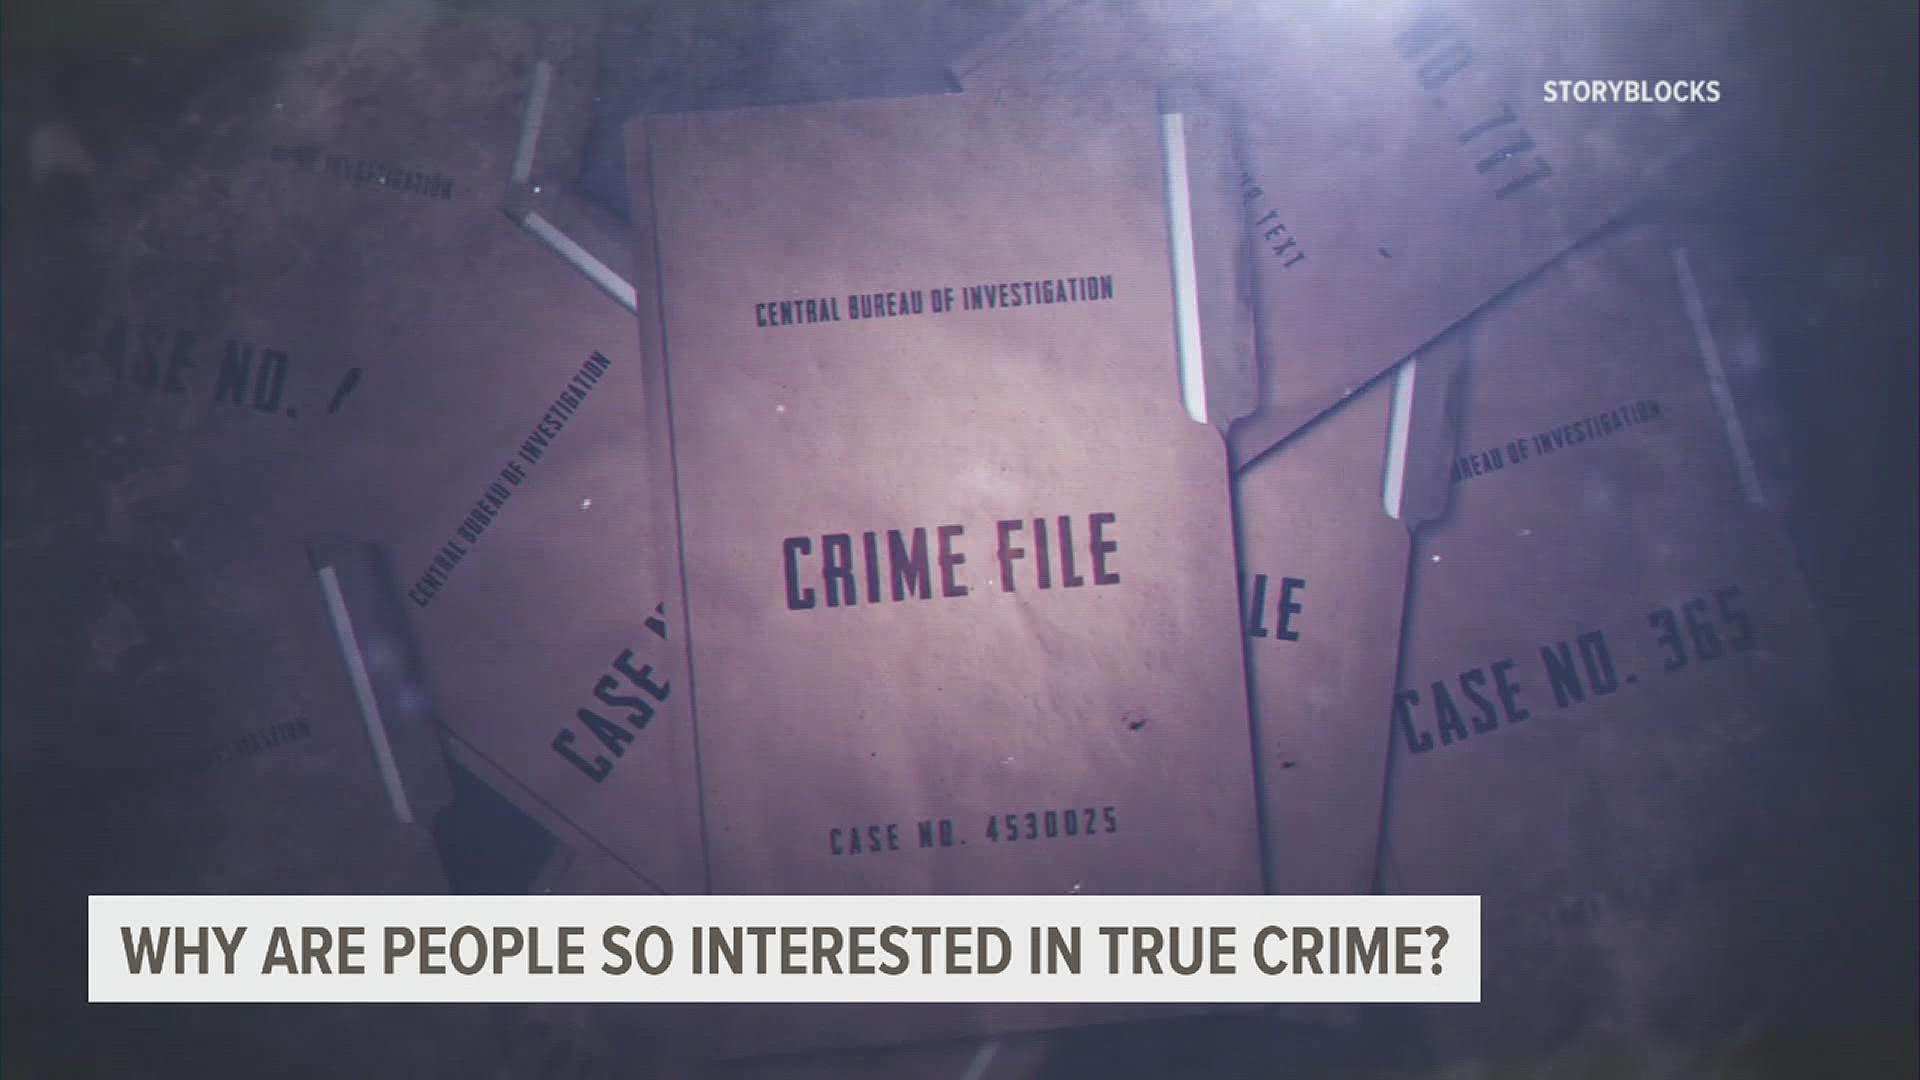 True crime has infiltrated every aspect of media in recent years. But, humans have long been interested in the evil that exists within our very own communities.